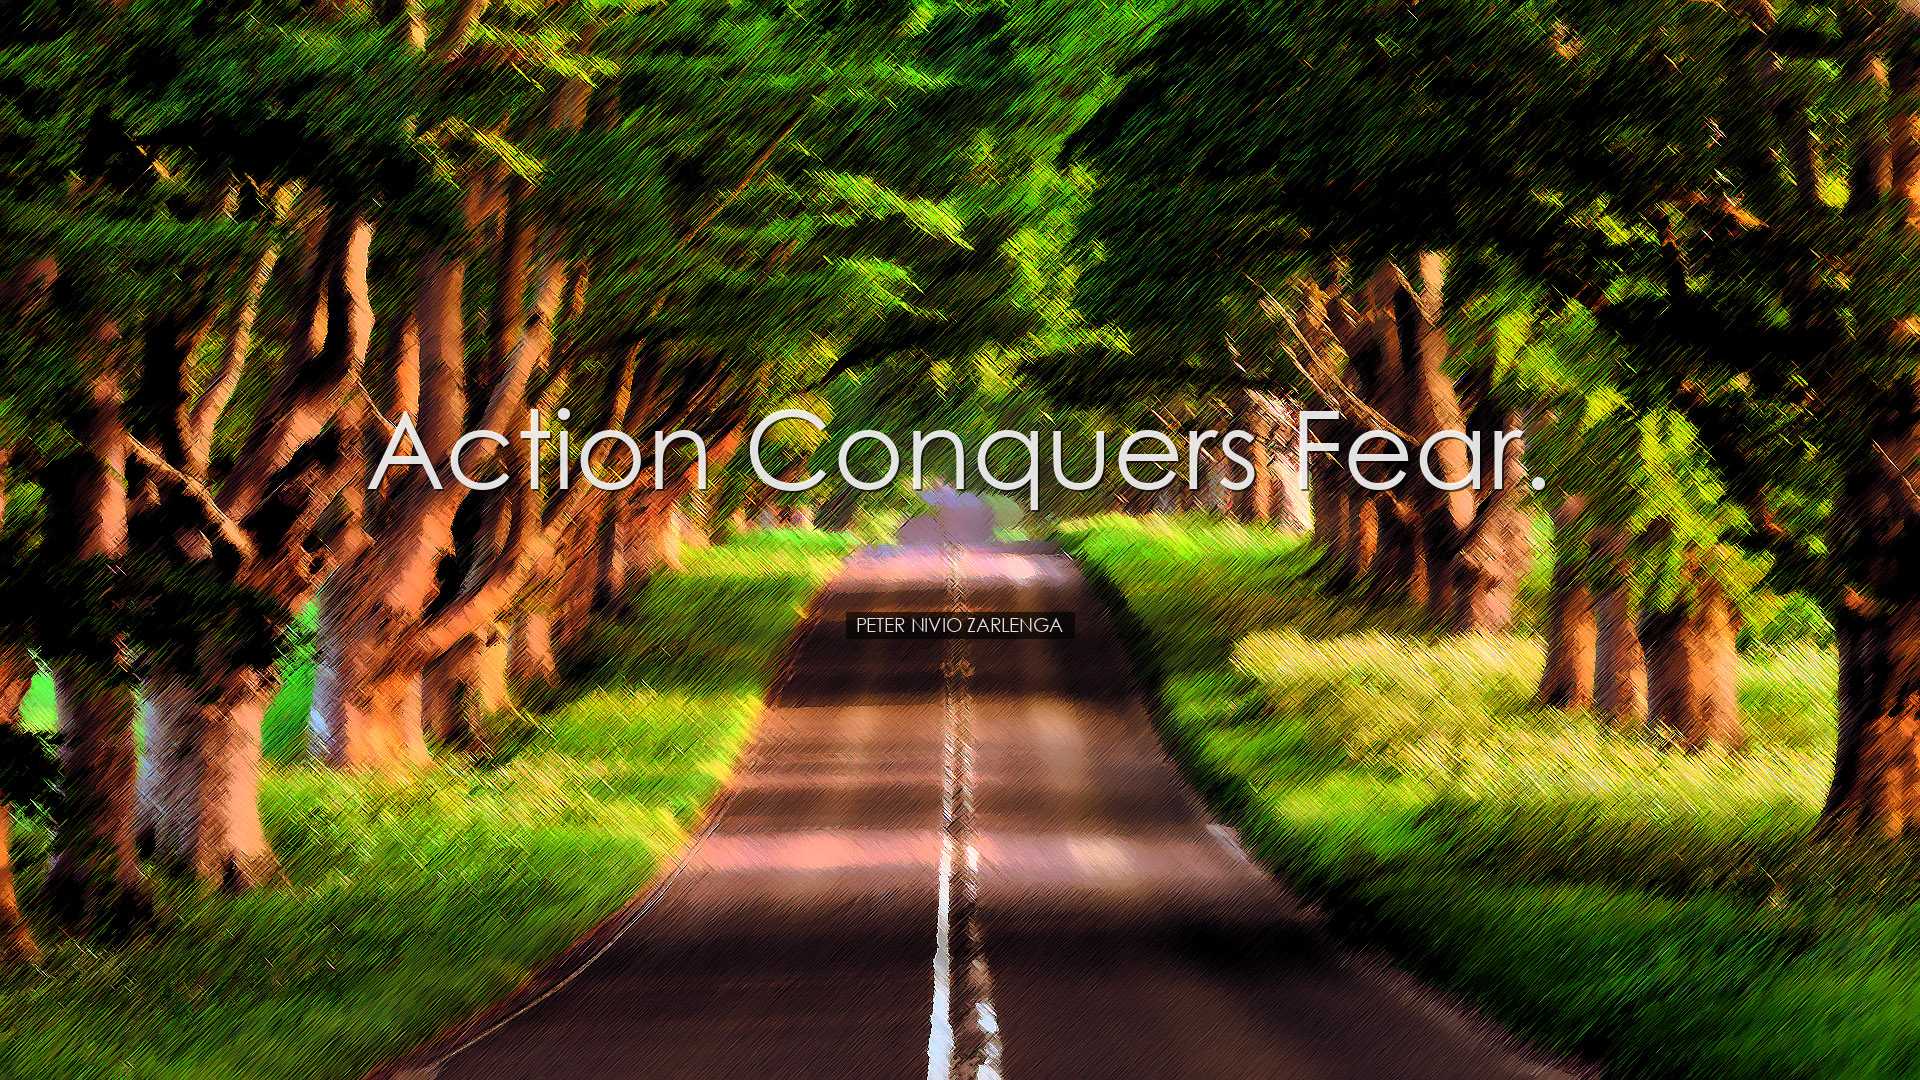 Action conquers fear. - Peter Nivio Zarlenga